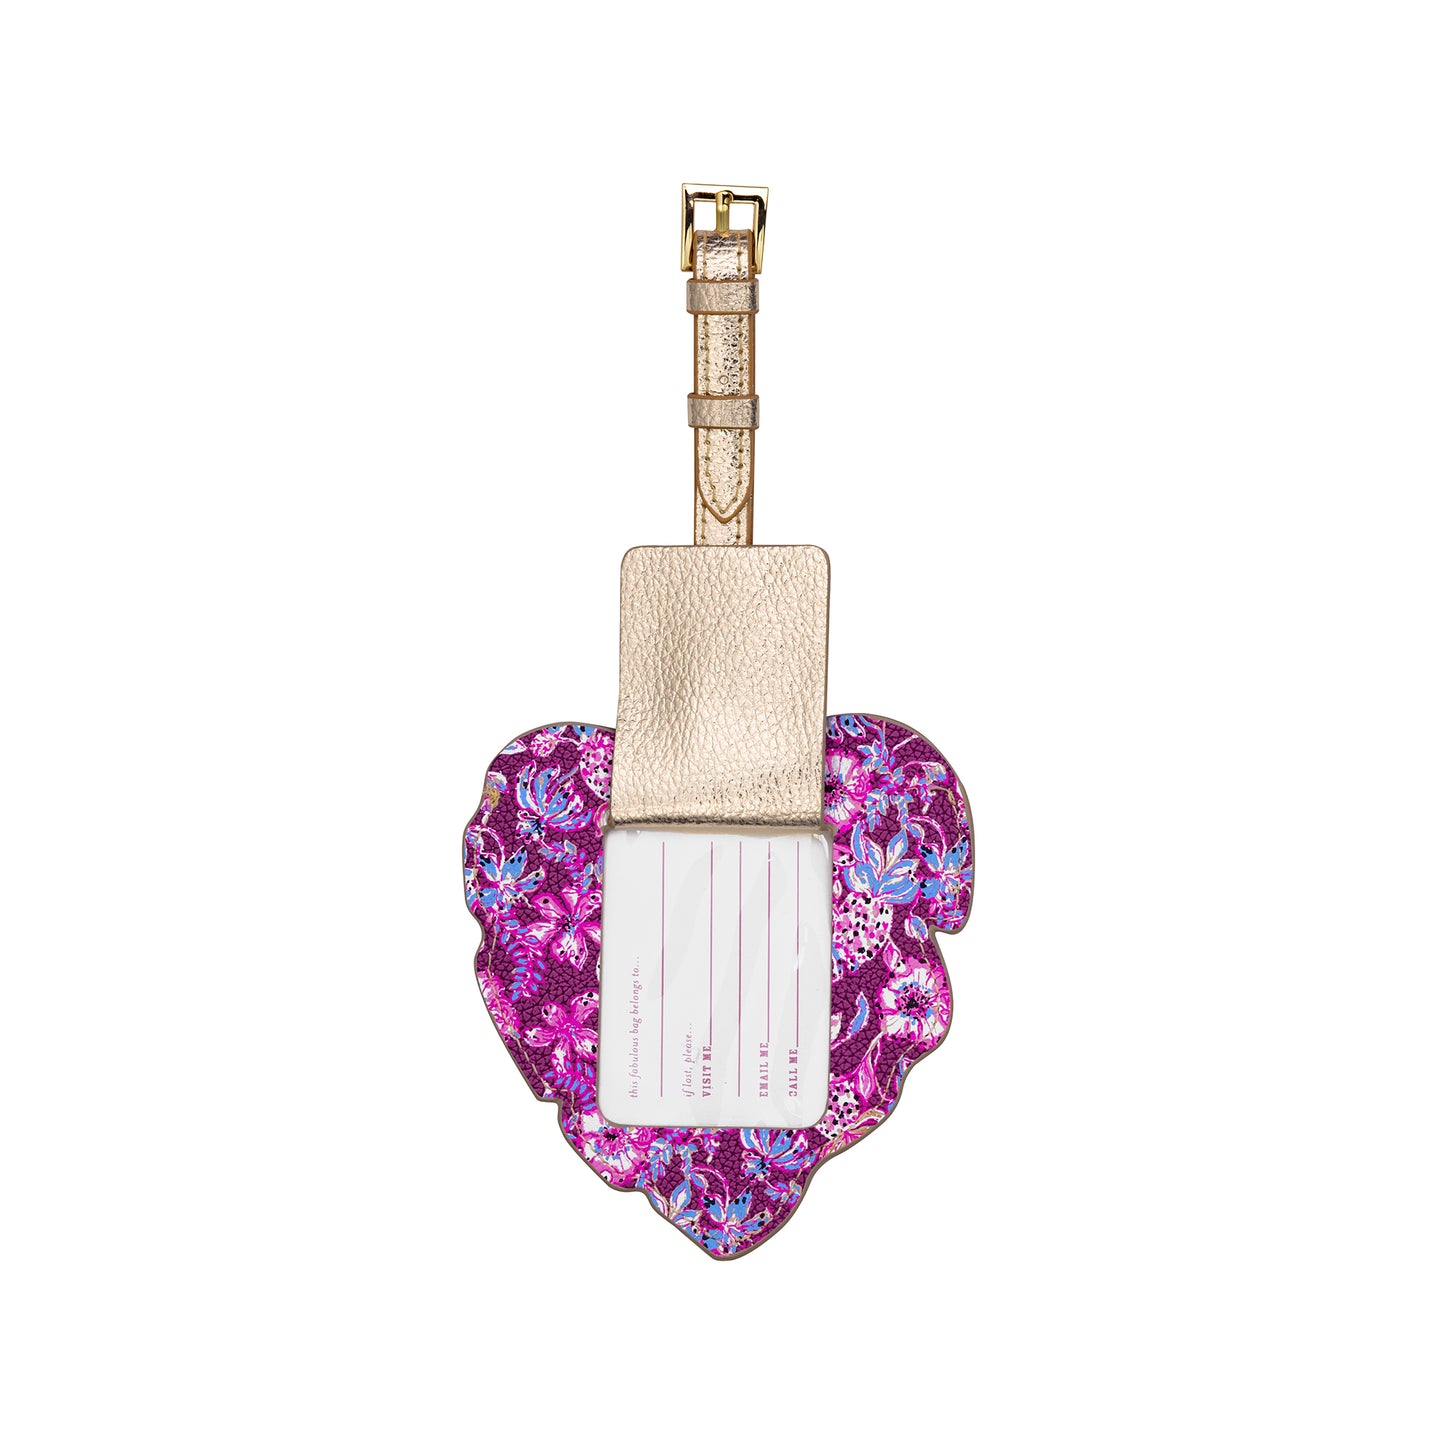 Shaped Luggage Tag, Amarena Cherry Tropical with a Twist